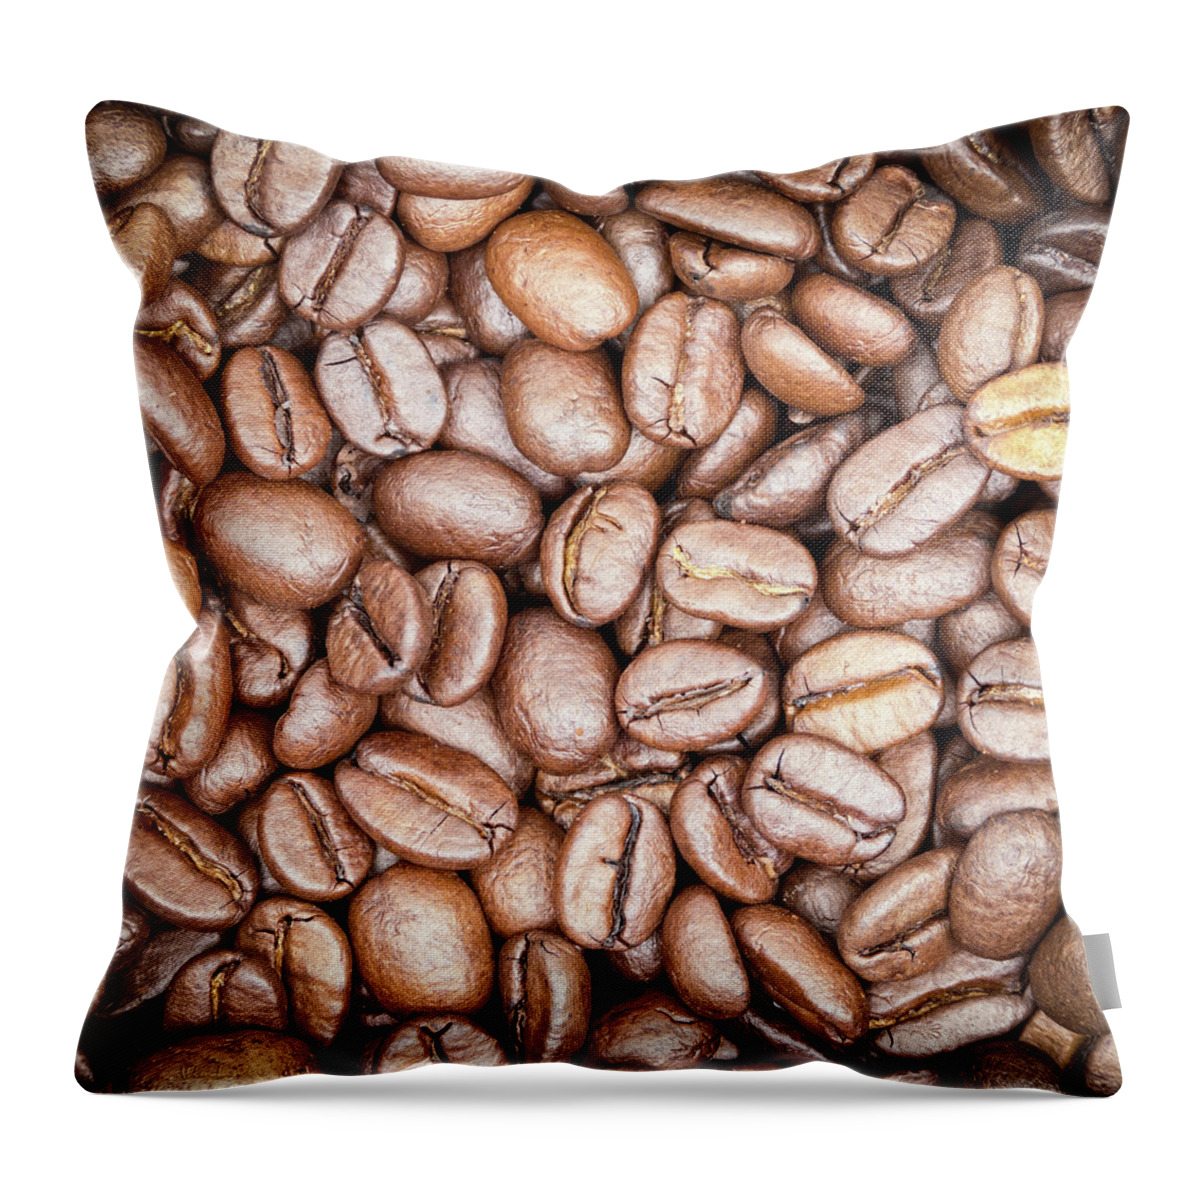 Coffee Beans Throw Pillow featuring the photograph Coffee Beans by Wim Lanclus